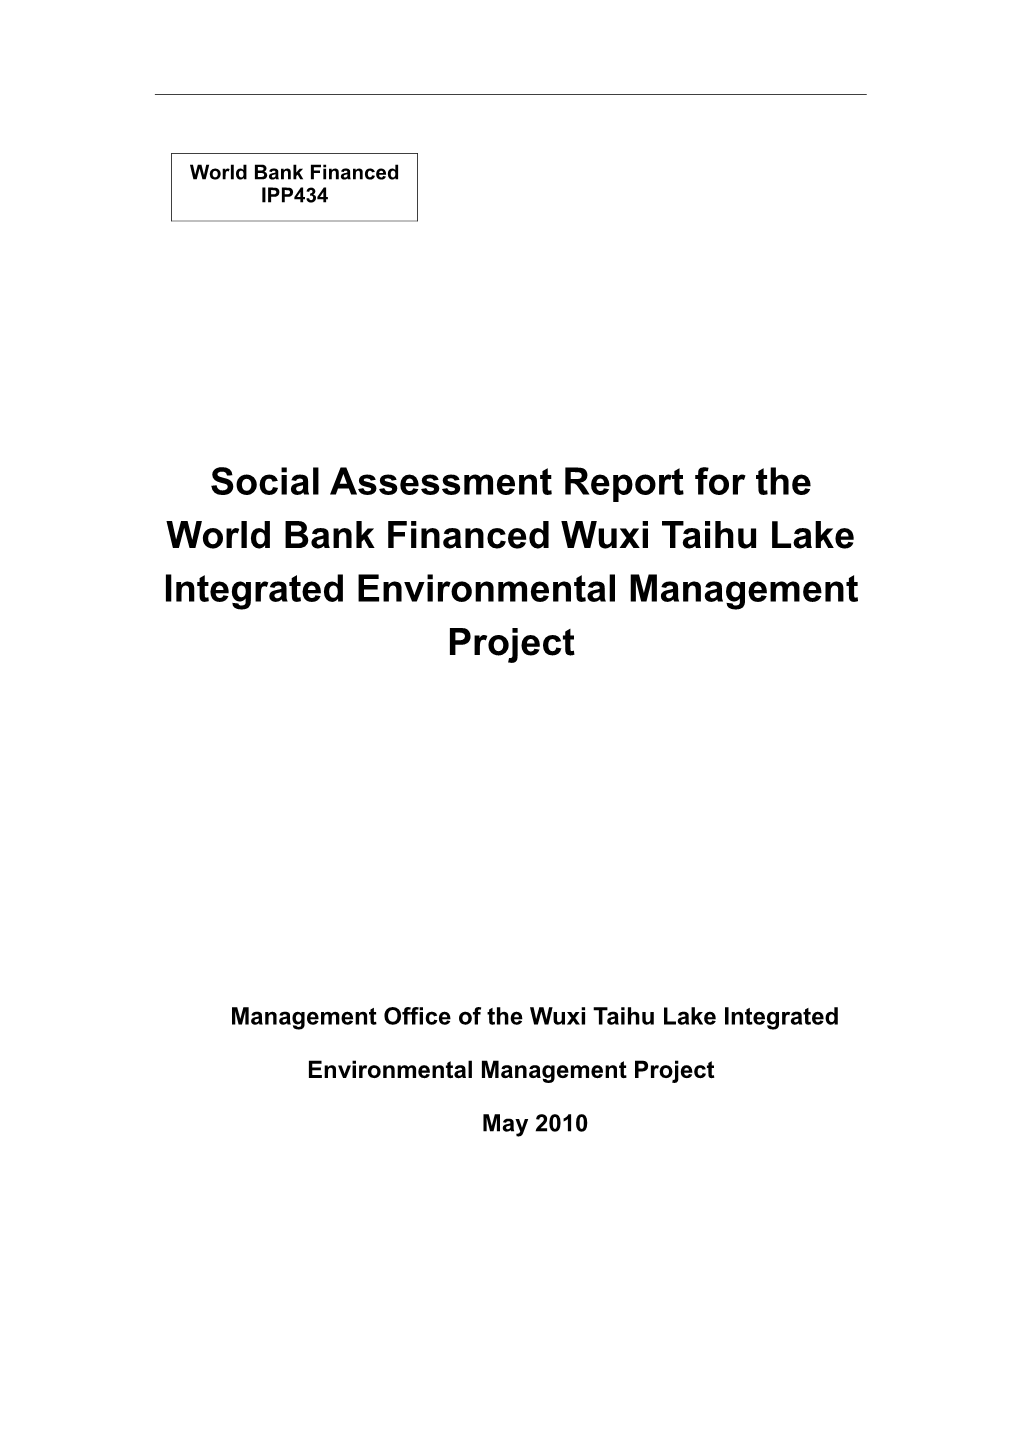 Management Office of the Wuxitaihulake Integrated Environmental Management Project